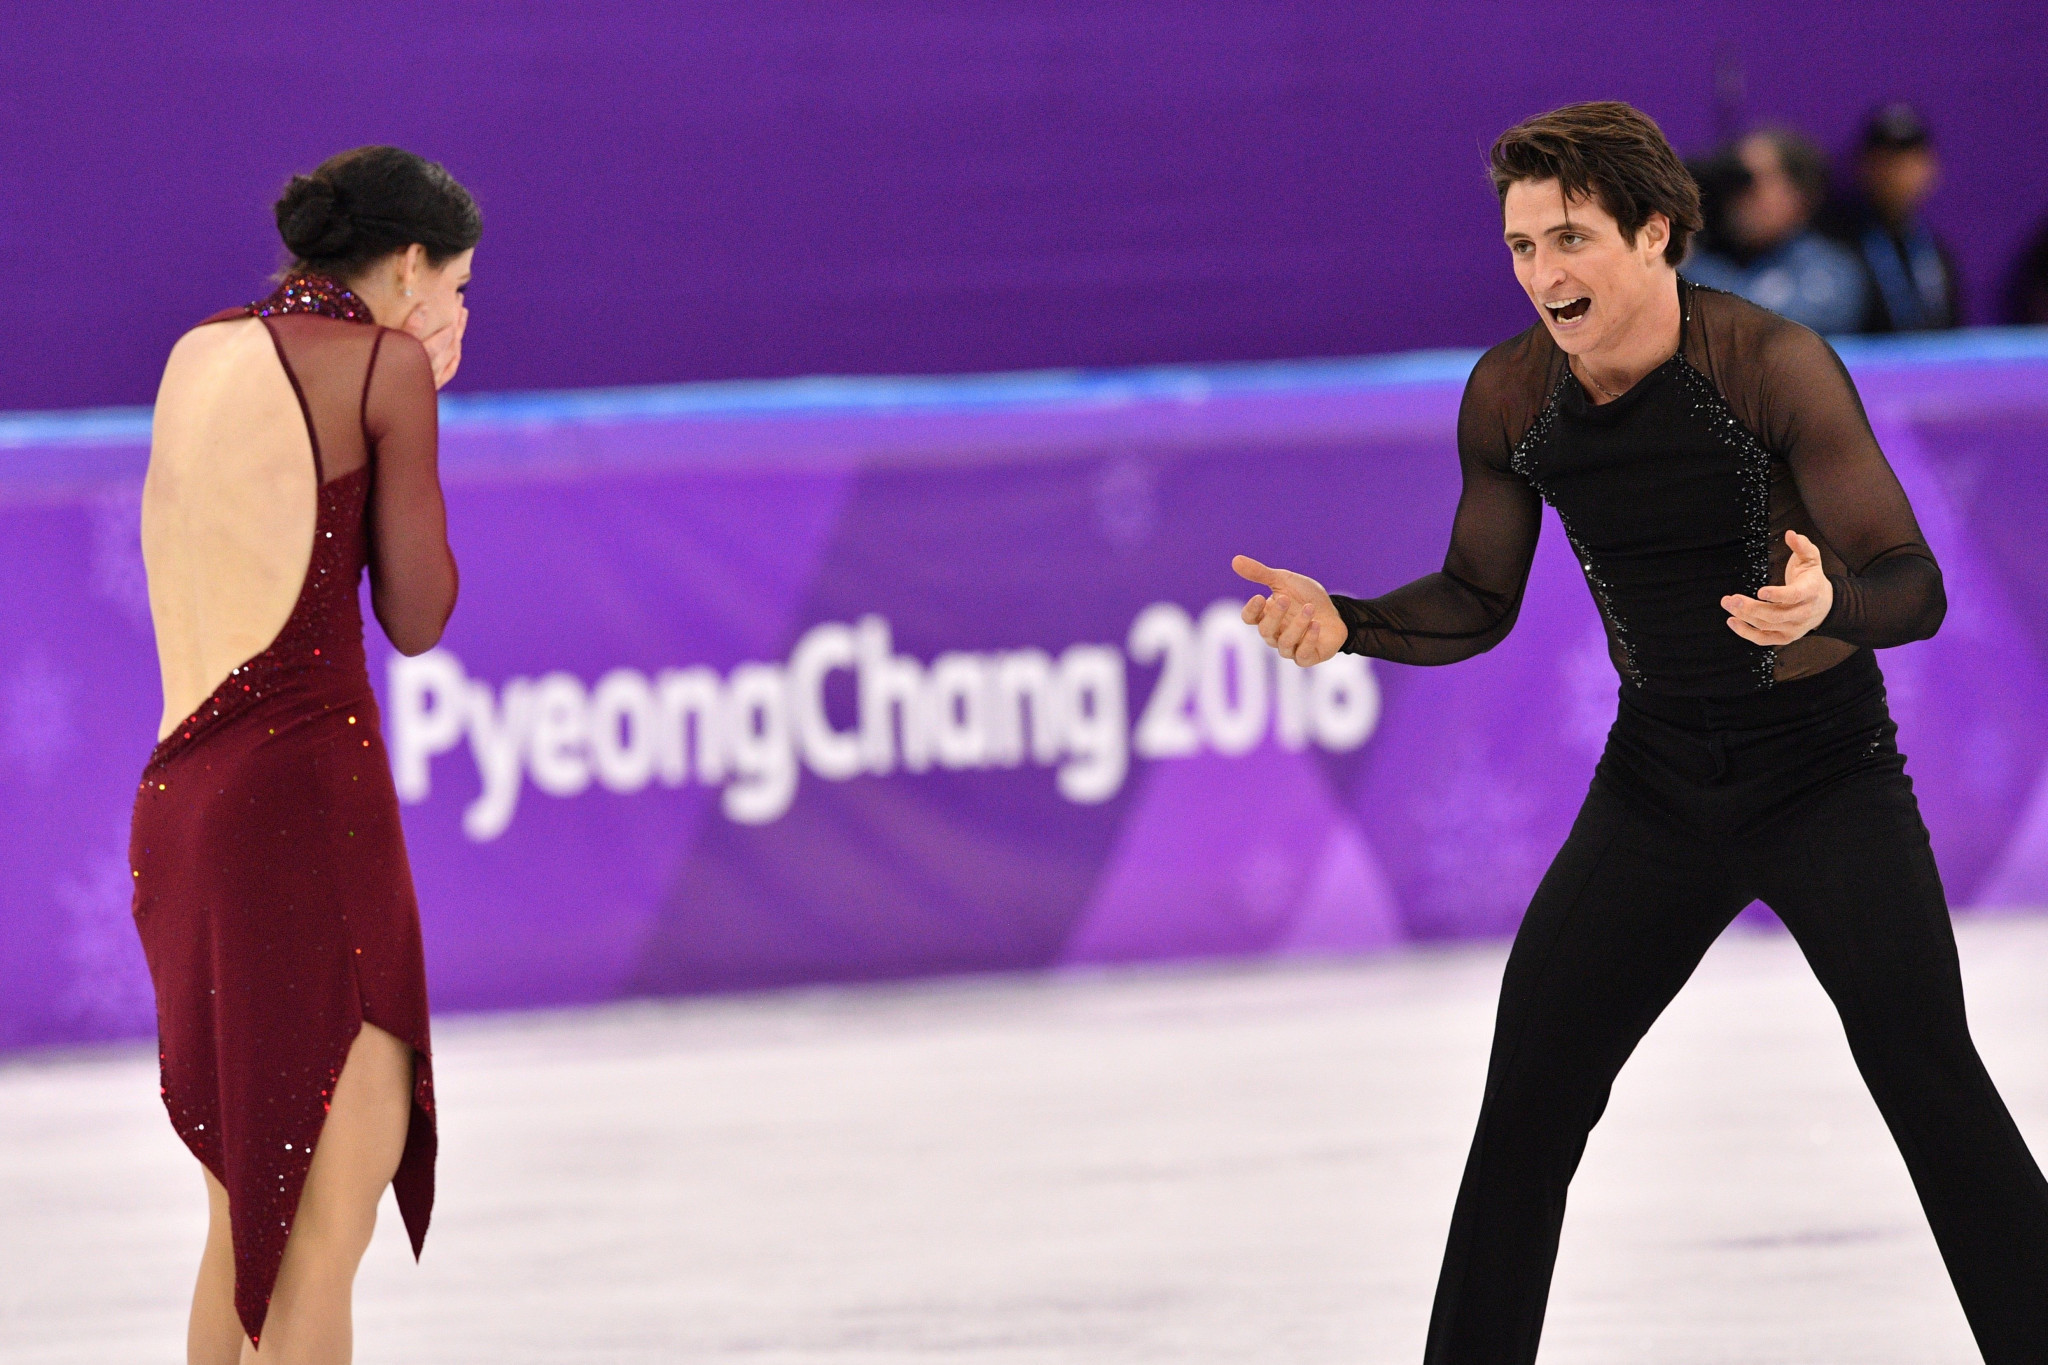 Canada's Tessa Virtue and Scott Moir re-gained their Olympic ice dance title at Pyeongchang 2018 to become the most decorated figure skaters in Games history ©Getty Images